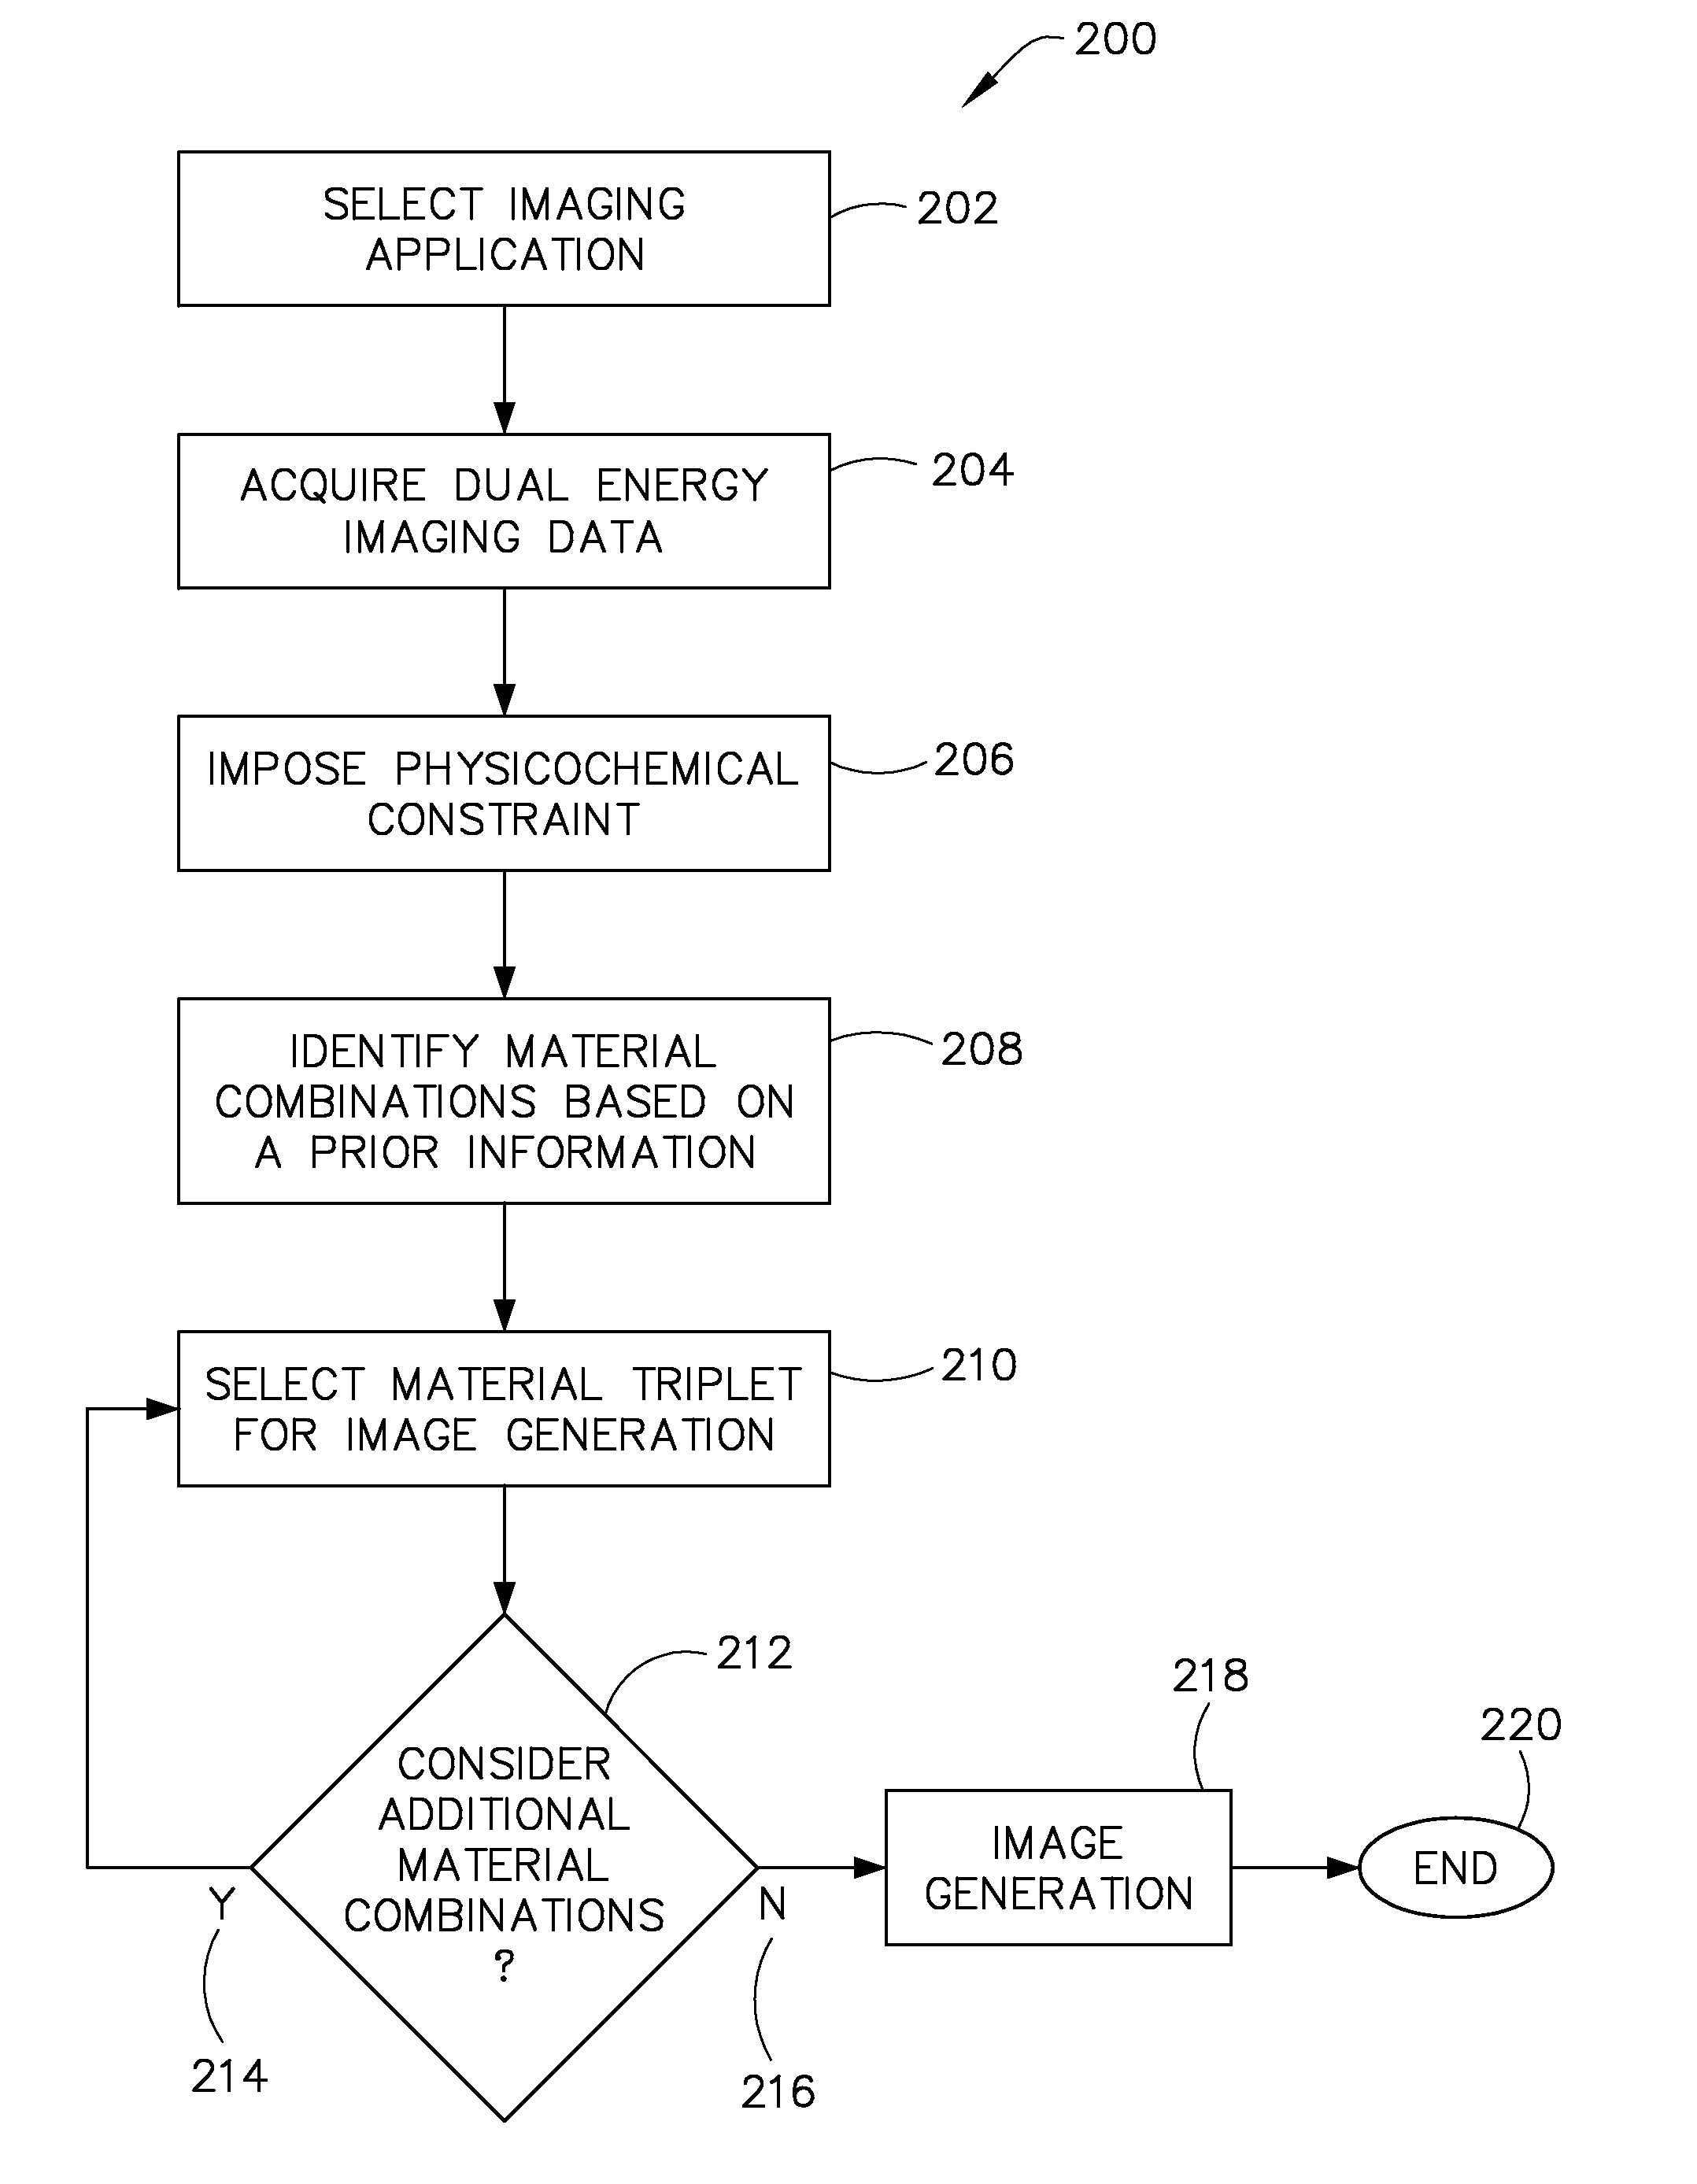 Apparatus for and method of selecting material triplets for a multi-material decomposition